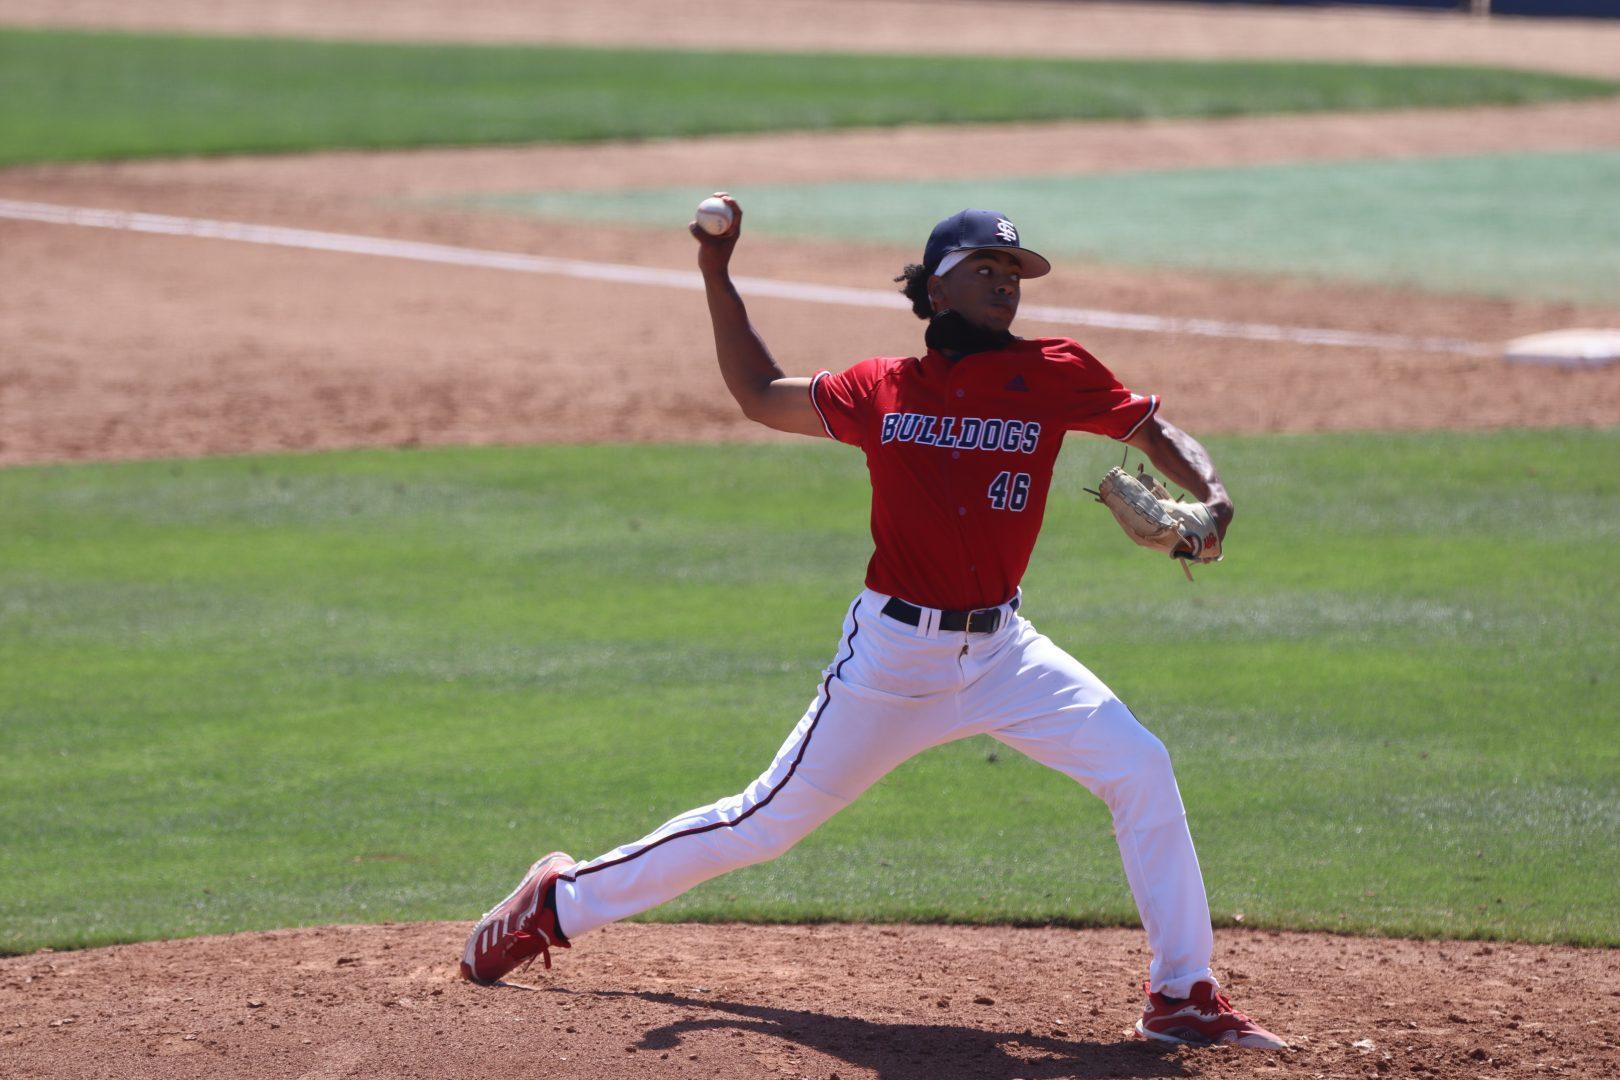 Fresno State pitcher Jamison Hill pitches in the fourth inning of the game against San Diego State University on April 17, 2021, at Pete Beiden field. (Kameron Thorn/The Collegian)